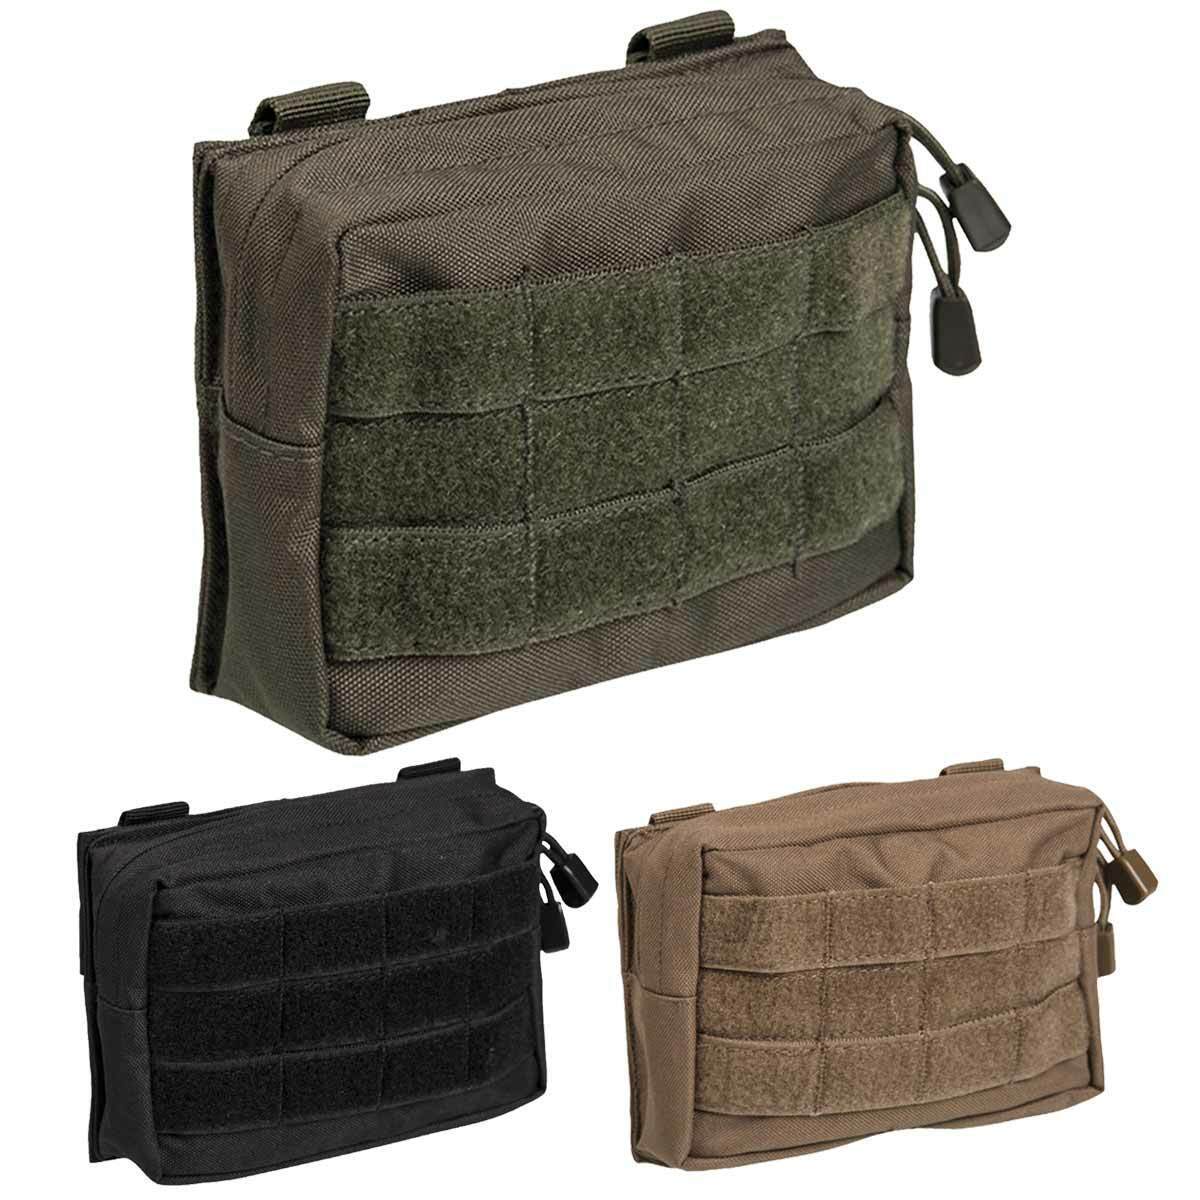 MOLLE Utility Belt Pouch Zipped Airsoft Security Tactical Army Webbing 17 x 12cm